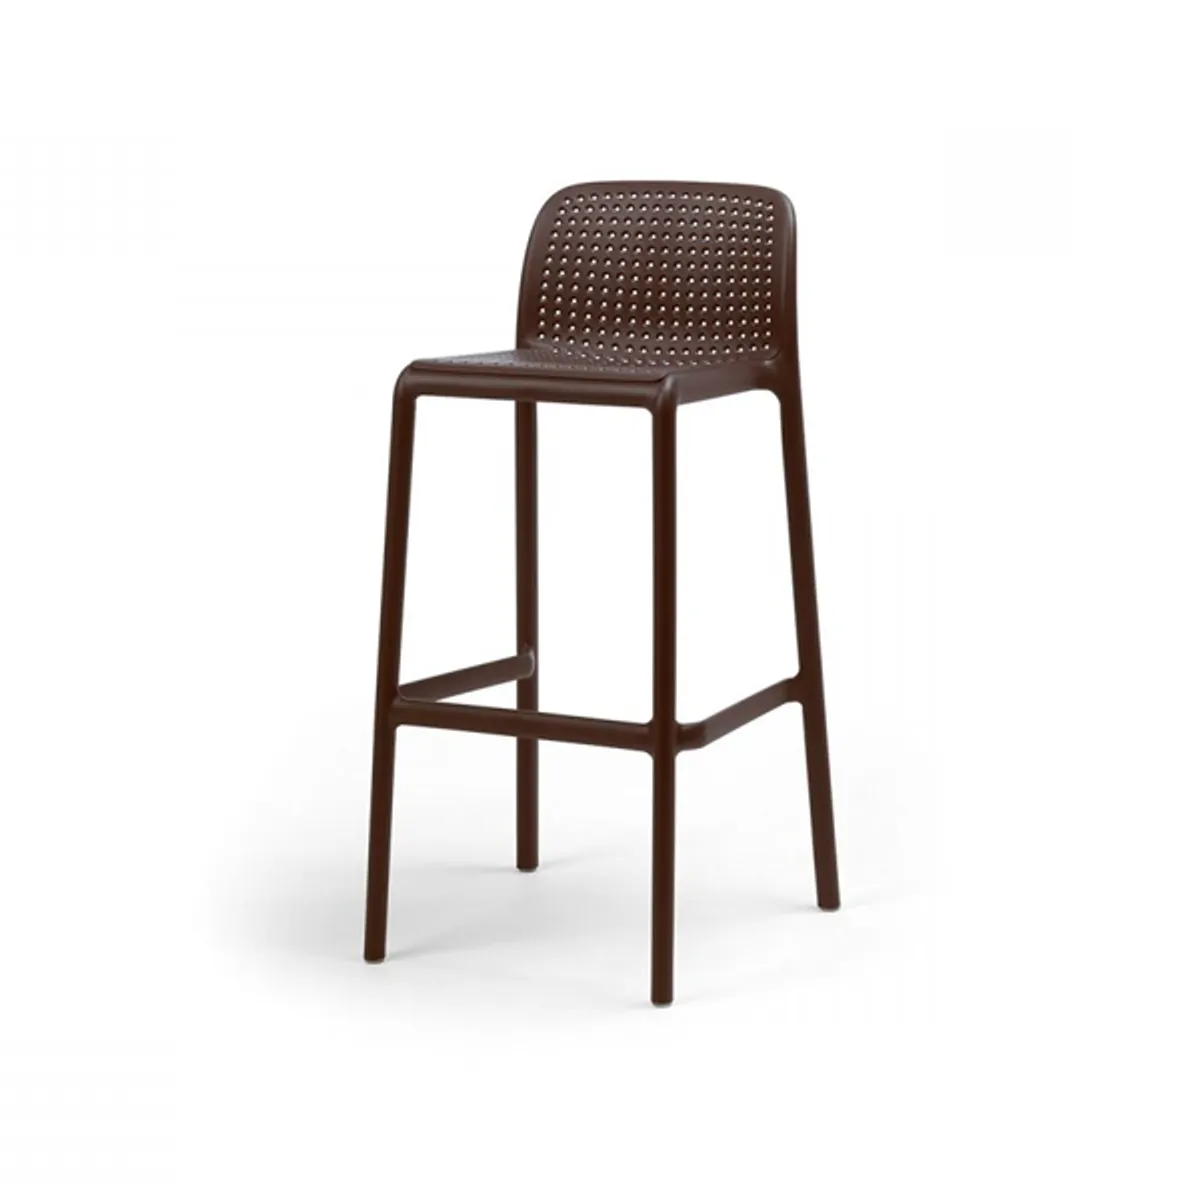 Lido bar stool Inside Out Contracts3